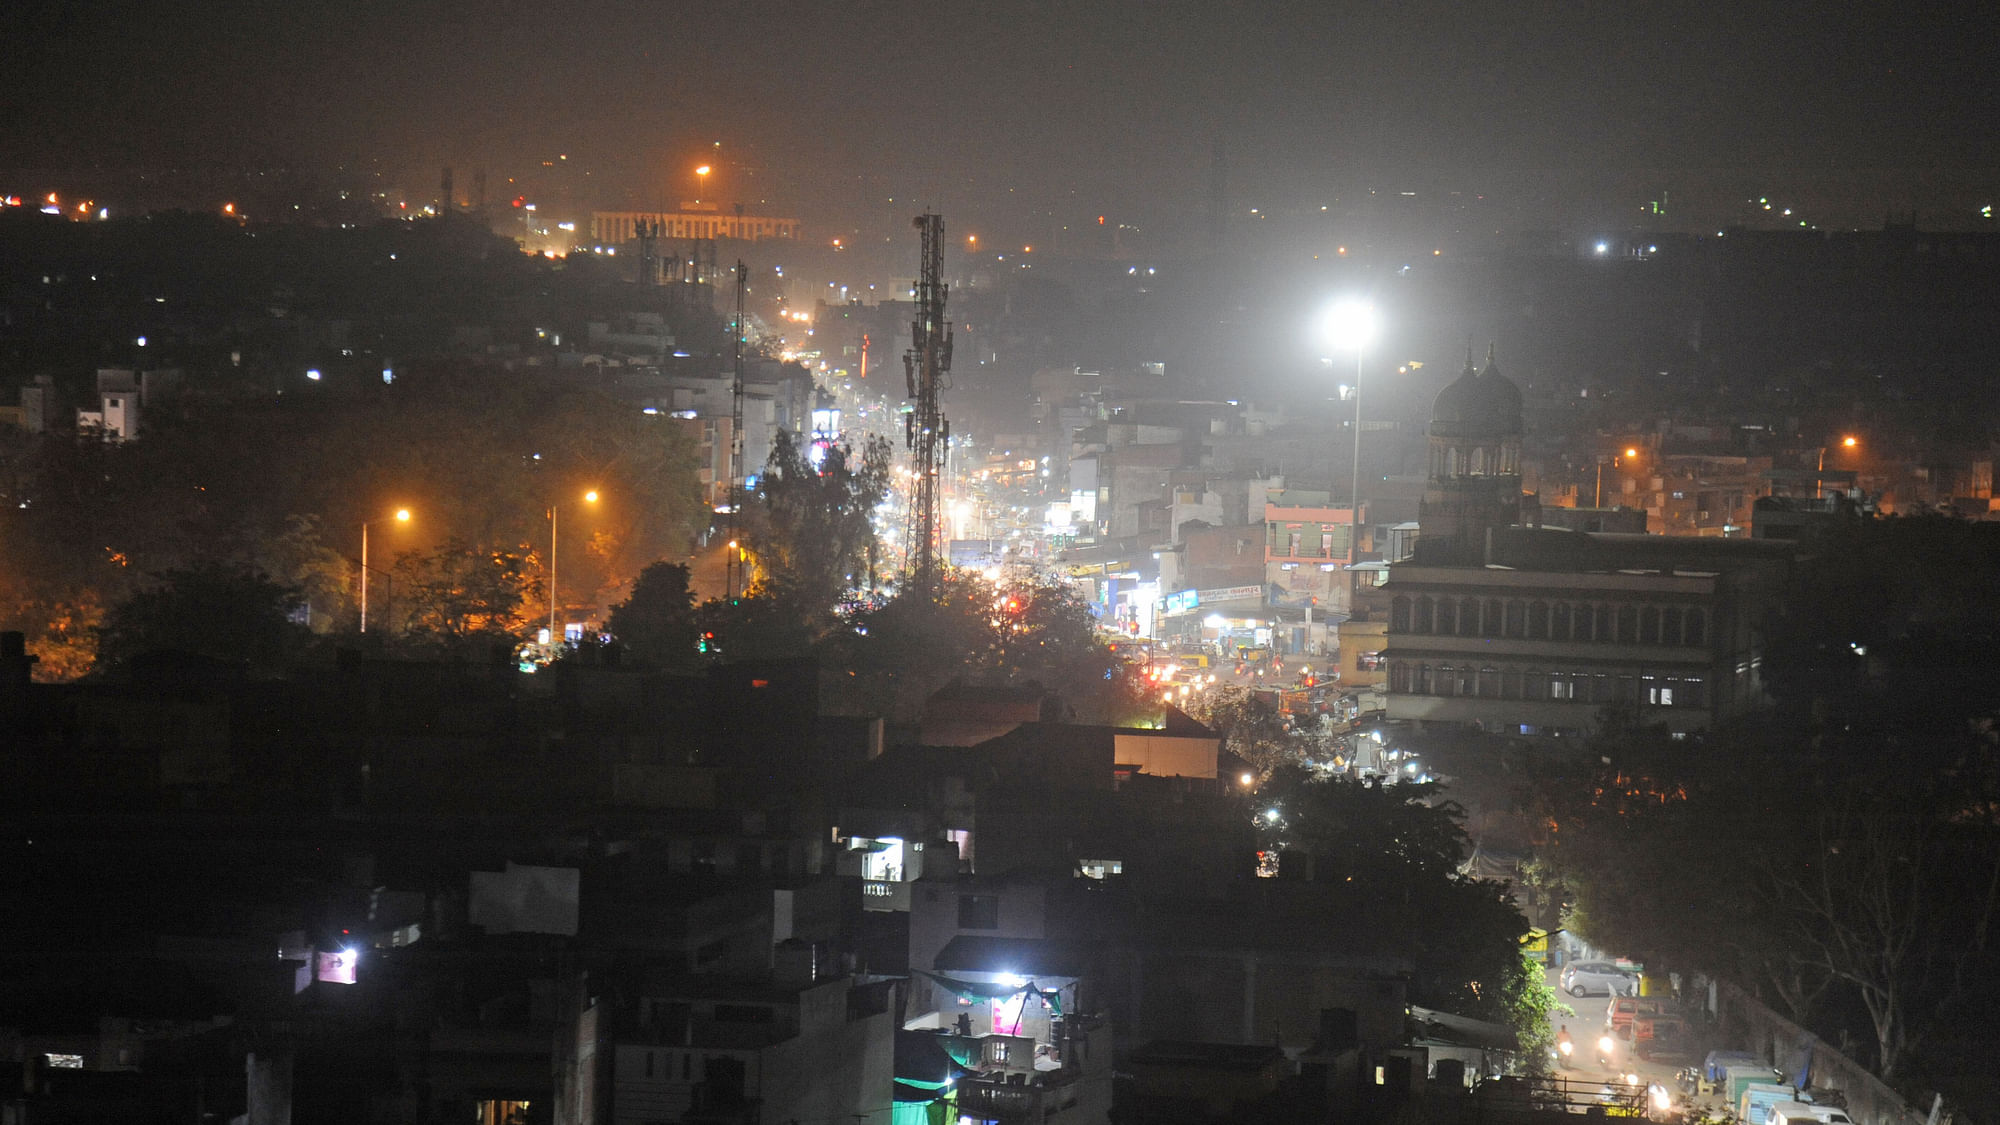 The walled city of Ahmedabad covered in smog on Friday, 17 November.